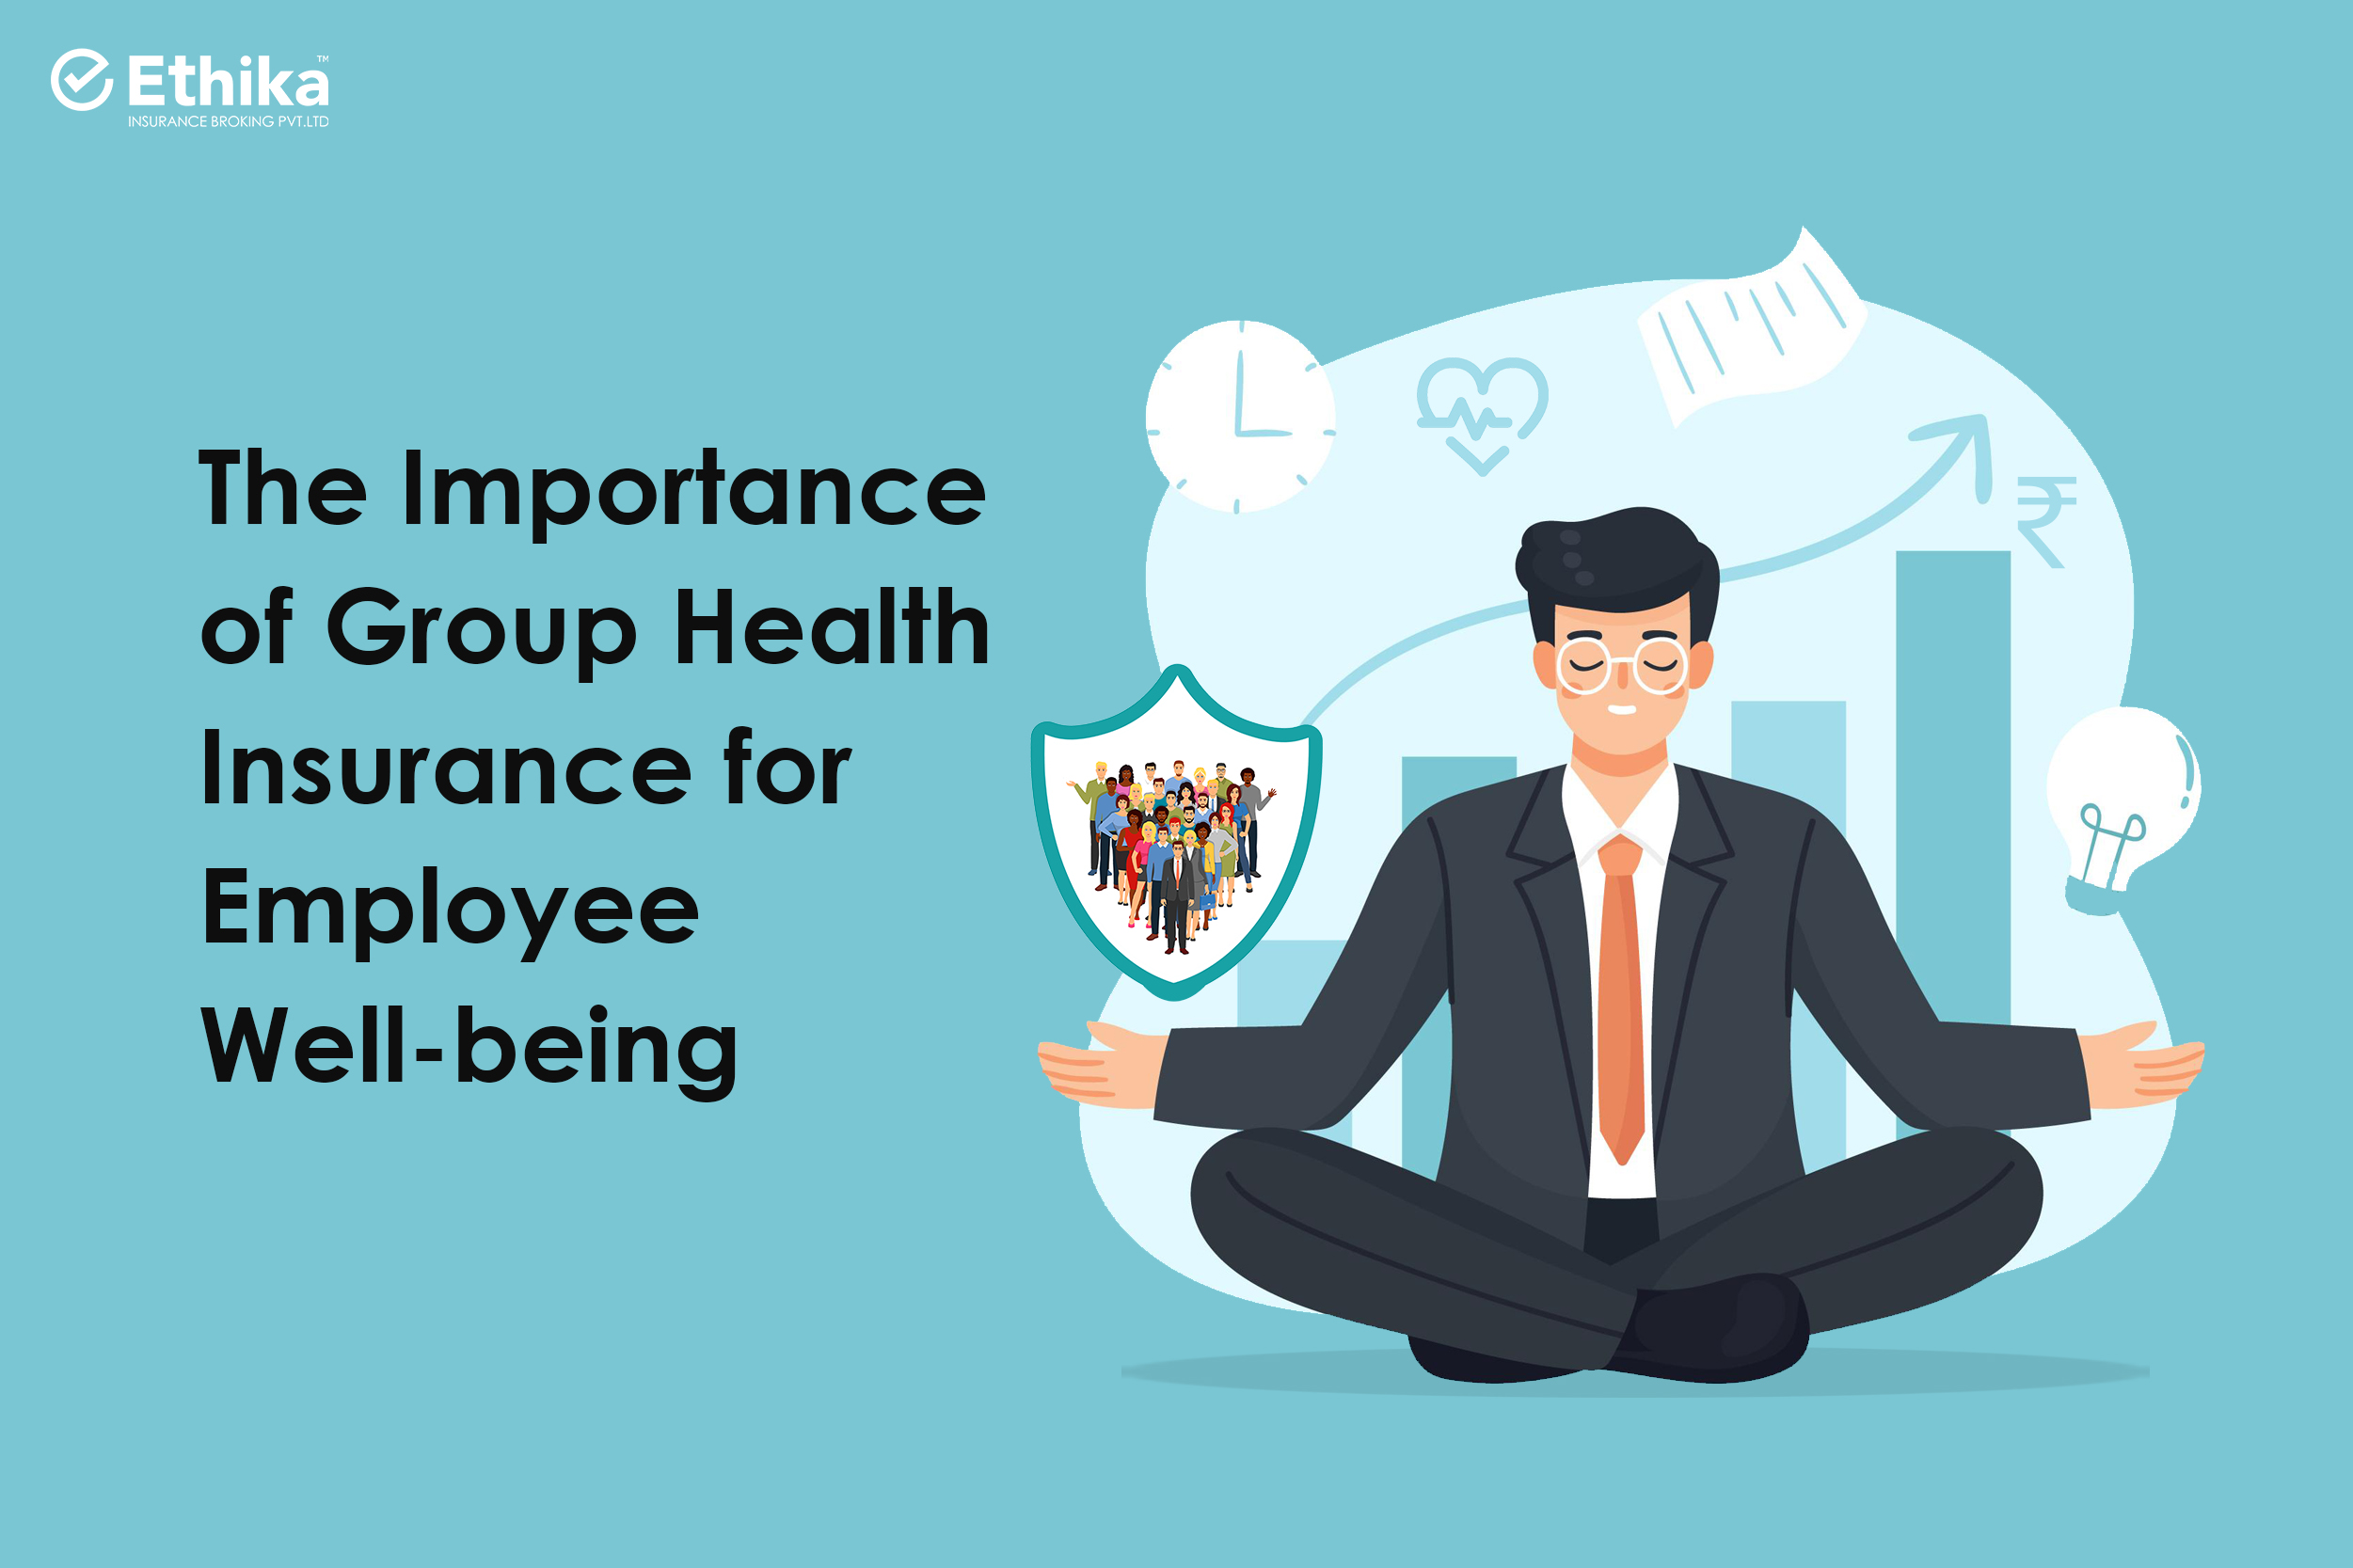 The Importance of Group Health Insurance for Employee Well-being